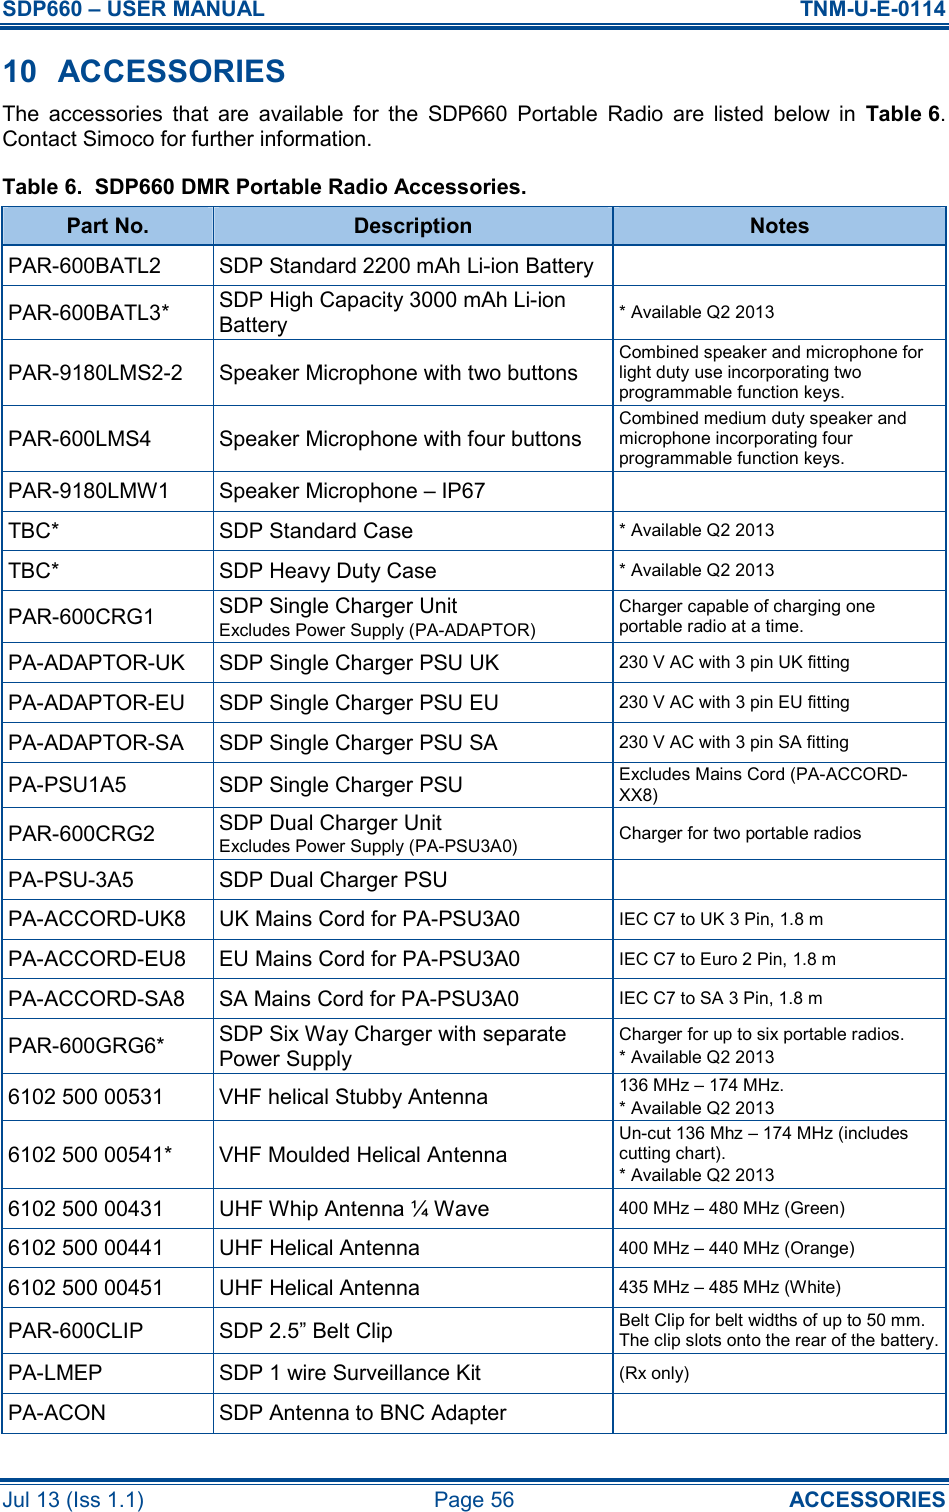 SDP660 – USER MANUAL  TNM-U-E-0114 Jul 13 (Iss 1.1)  Page 56  ACCESSORIES 10  ACCESSORIES The  accessories  that  are  available  for  the  SDP660  Portable  Radio  are  listed  below  in  Table 6.  Contact Simoco for further information. Table 6.  SDP660 DMR Portable Radio Accessories. Part No.  Description  Notes PAR-600BATL2  SDP Standard 2200 mAh Li-ion Battery  PAR-600BATL3*  SDP High Capacity 3000 mAh Li-ion Battery * Available Q2 2013 PAR-9180LMS2-2  Speaker Microphone with two buttons Combined speaker and microphone for light duty use incorporating two programmable function keys. PAR-600LMS4  Speaker Microphone with four buttons Combined medium duty speaker and microphone incorporating four programmable function keys. PAR-9180LMW1  Speaker Microphone – IP67  TBC*  SDP Standard Case * Available Q2 2013 TBC*  SDP Heavy Duty Case * Available Q2 2013 PAR-600CRG1  SDP Single Charger Unit Excludes Power Supply (PA-ADAPTOR) Charger capable of charging one portable radio at a time. PA-ADAPTOR-UK  SDP Single Charger PSU UK 230 V AC with 3 pin UK fitting PA-ADAPTOR-EU  SDP Single Charger PSU EU 230 V AC with 3 pin EU fitting PA-ADAPTOR-SA  SDP Single Charger PSU SA 230 V AC with 3 pin SA fitting PA-PSU1A5  SDP Single Charger PSU Excludes Mains Cord (PA-ACCORD-XX8) PAR-600CRG2  SDP Dual Charger Unit Excludes Power Supply (PA-PSU3A0)  Charger for two portable radios PA-PSU-3A5  SDP Dual Charger PSU  PA-ACCORD-UK8  UK Mains Cord for PA-PSU3A0 IEC C7 to UK 3 Pin, 1.8 m PA-ACCORD-EU8  EU Mains Cord for PA-PSU3A0 IEC C7 to Euro 2 Pin, 1.8 m PA-ACCORD-SA8  SA Mains Cord for PA-PSU3A0 IEC C7 to SA 3 Pin, 1.8 m PAR-600GRG6*  SDP Six Way Charger with separate Power Supply Charger for up to six portable radios. * Available Q2 2013 6102 500 00531  VHF helical Stubby Antenna 136 MHz – 174 MHz. * Available Q2 2013 6102 500 00541*  VHF Moulded Helical Antenna Un-cut 136 Mhz – 174 MHz (includes cutting chart). * Available Q2 2013 6102 500 00431  UHF Whip Antenna ¼ Wave 400 MHz – 480 MHz (Green) 6102 500 00441  UHF Helical Antenna 400 MHz – 440 MHz (Orange) 6102 500 00451  UHF Helical Antenna 435 MHz – 485 MHz (White) PAR-600CLIP  SDP 2.5” Belt Clip Belt Clip for belt widths of up to 50 mm.  The clip slots onto the rear of the battery. PA-LMEP  SDP 1 wire Surveillance Kit (Rx only) PA-ACON  SDP Antenna to BNC Adapter  